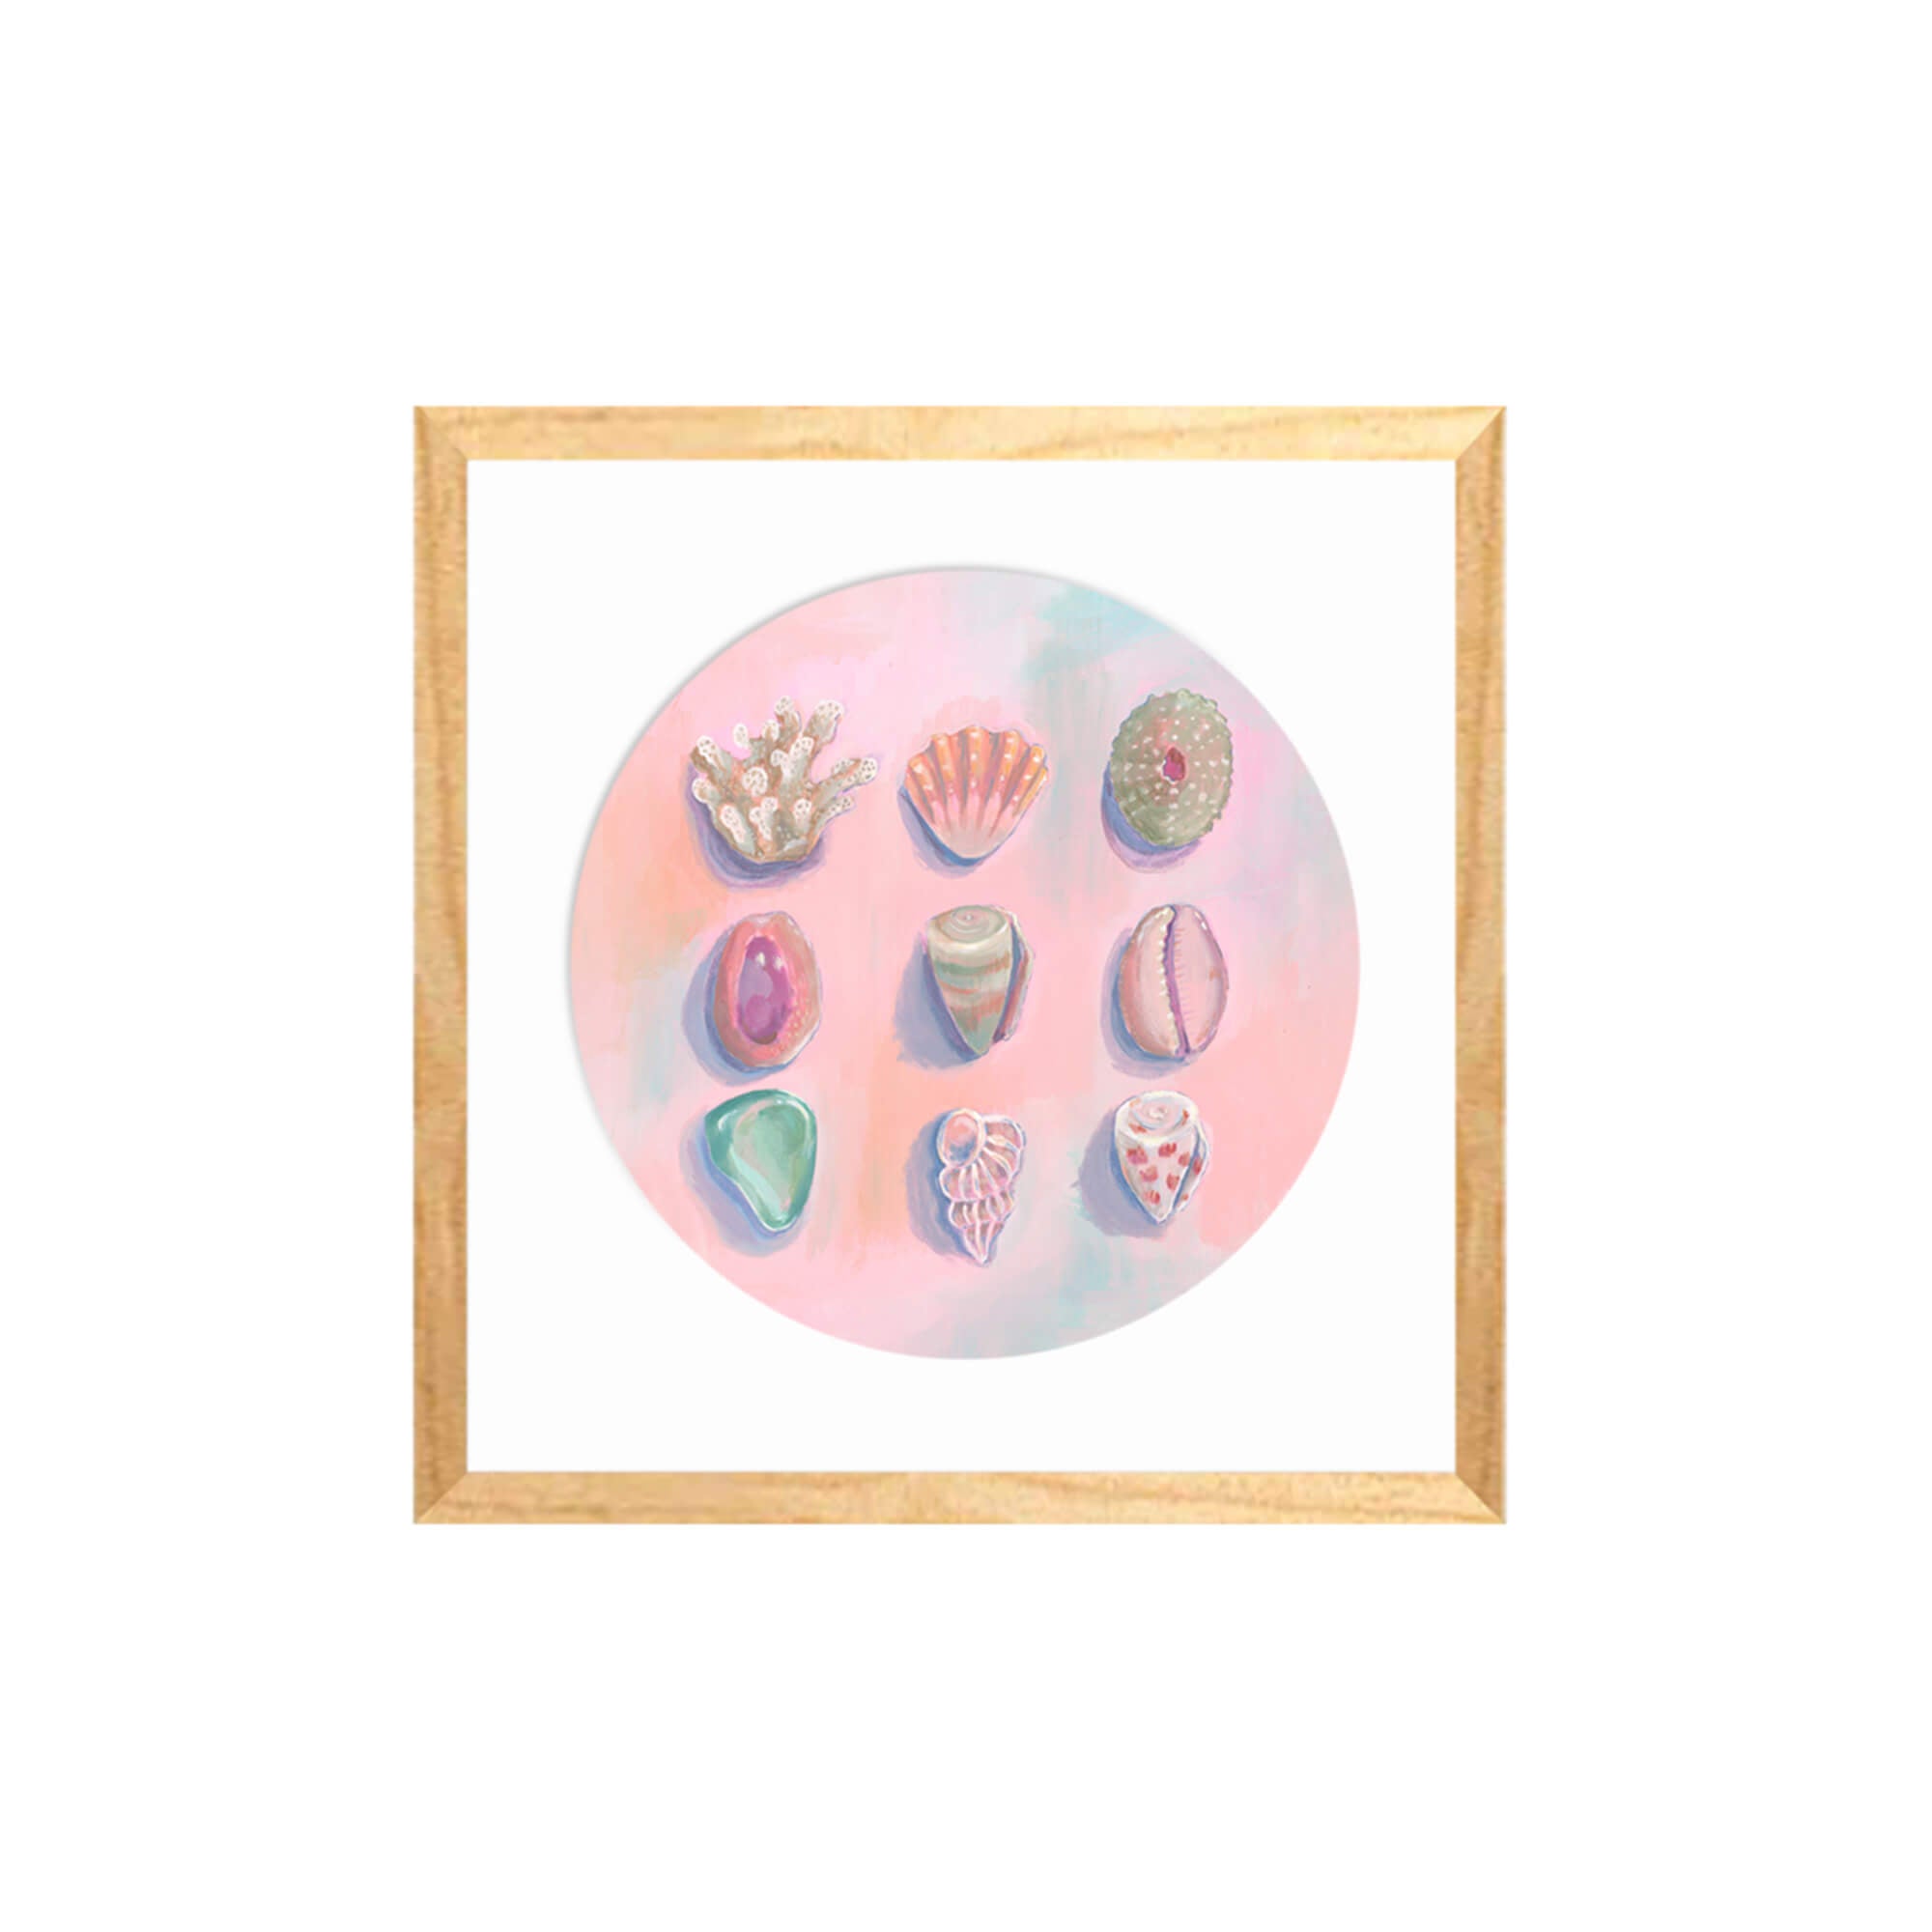 Hues of pastel blue and pink with colorful seashells by Hawaii artist Lindsay Wilkins